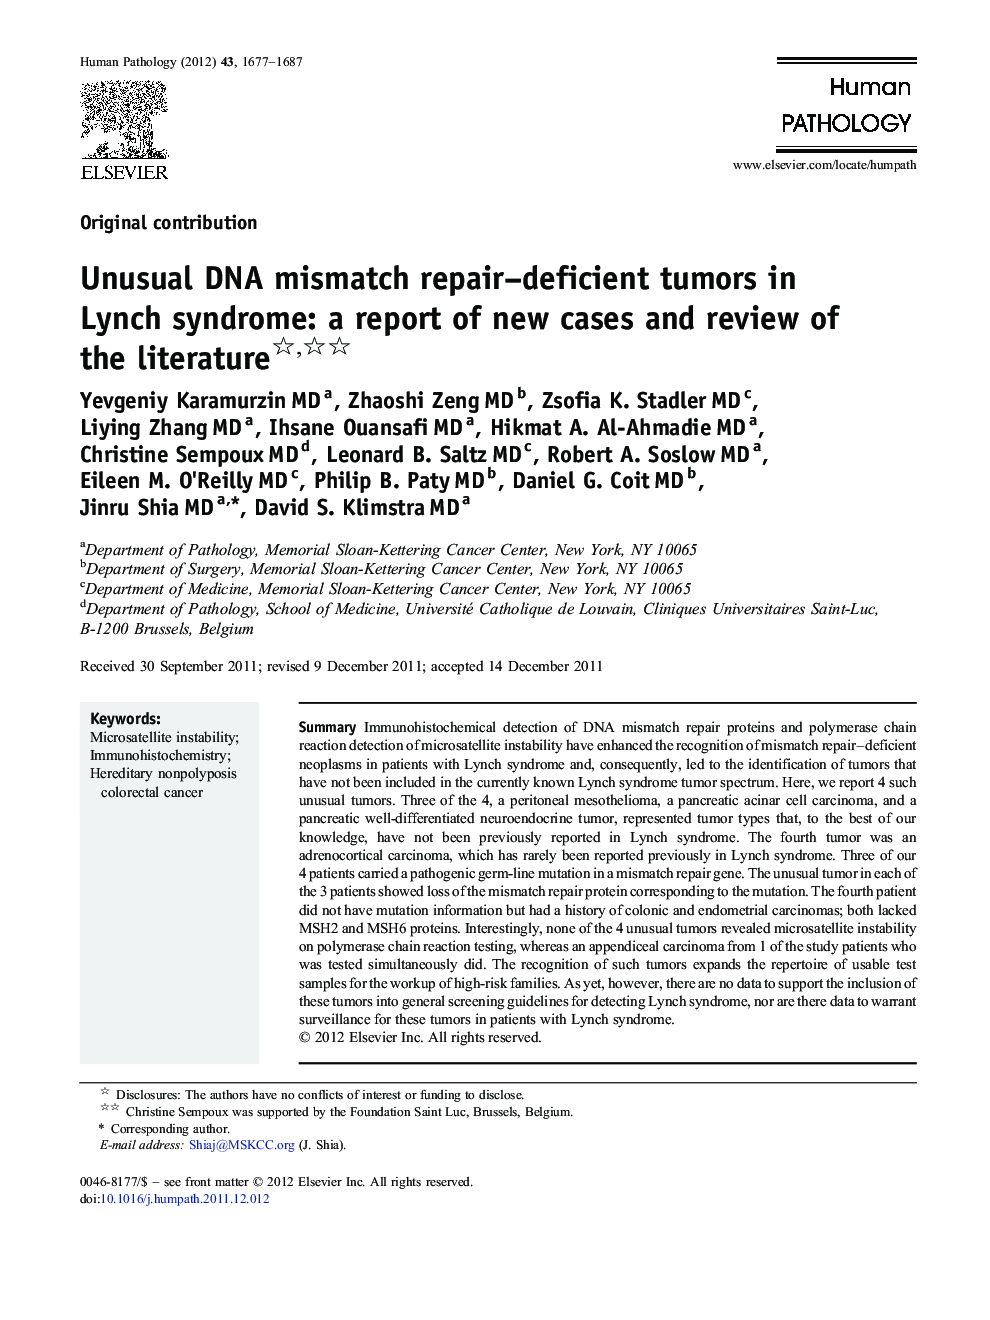 Unusual DNA mismatch repair–deficient tumors in Lynch syndrome: a report of new cases and review of the literature 